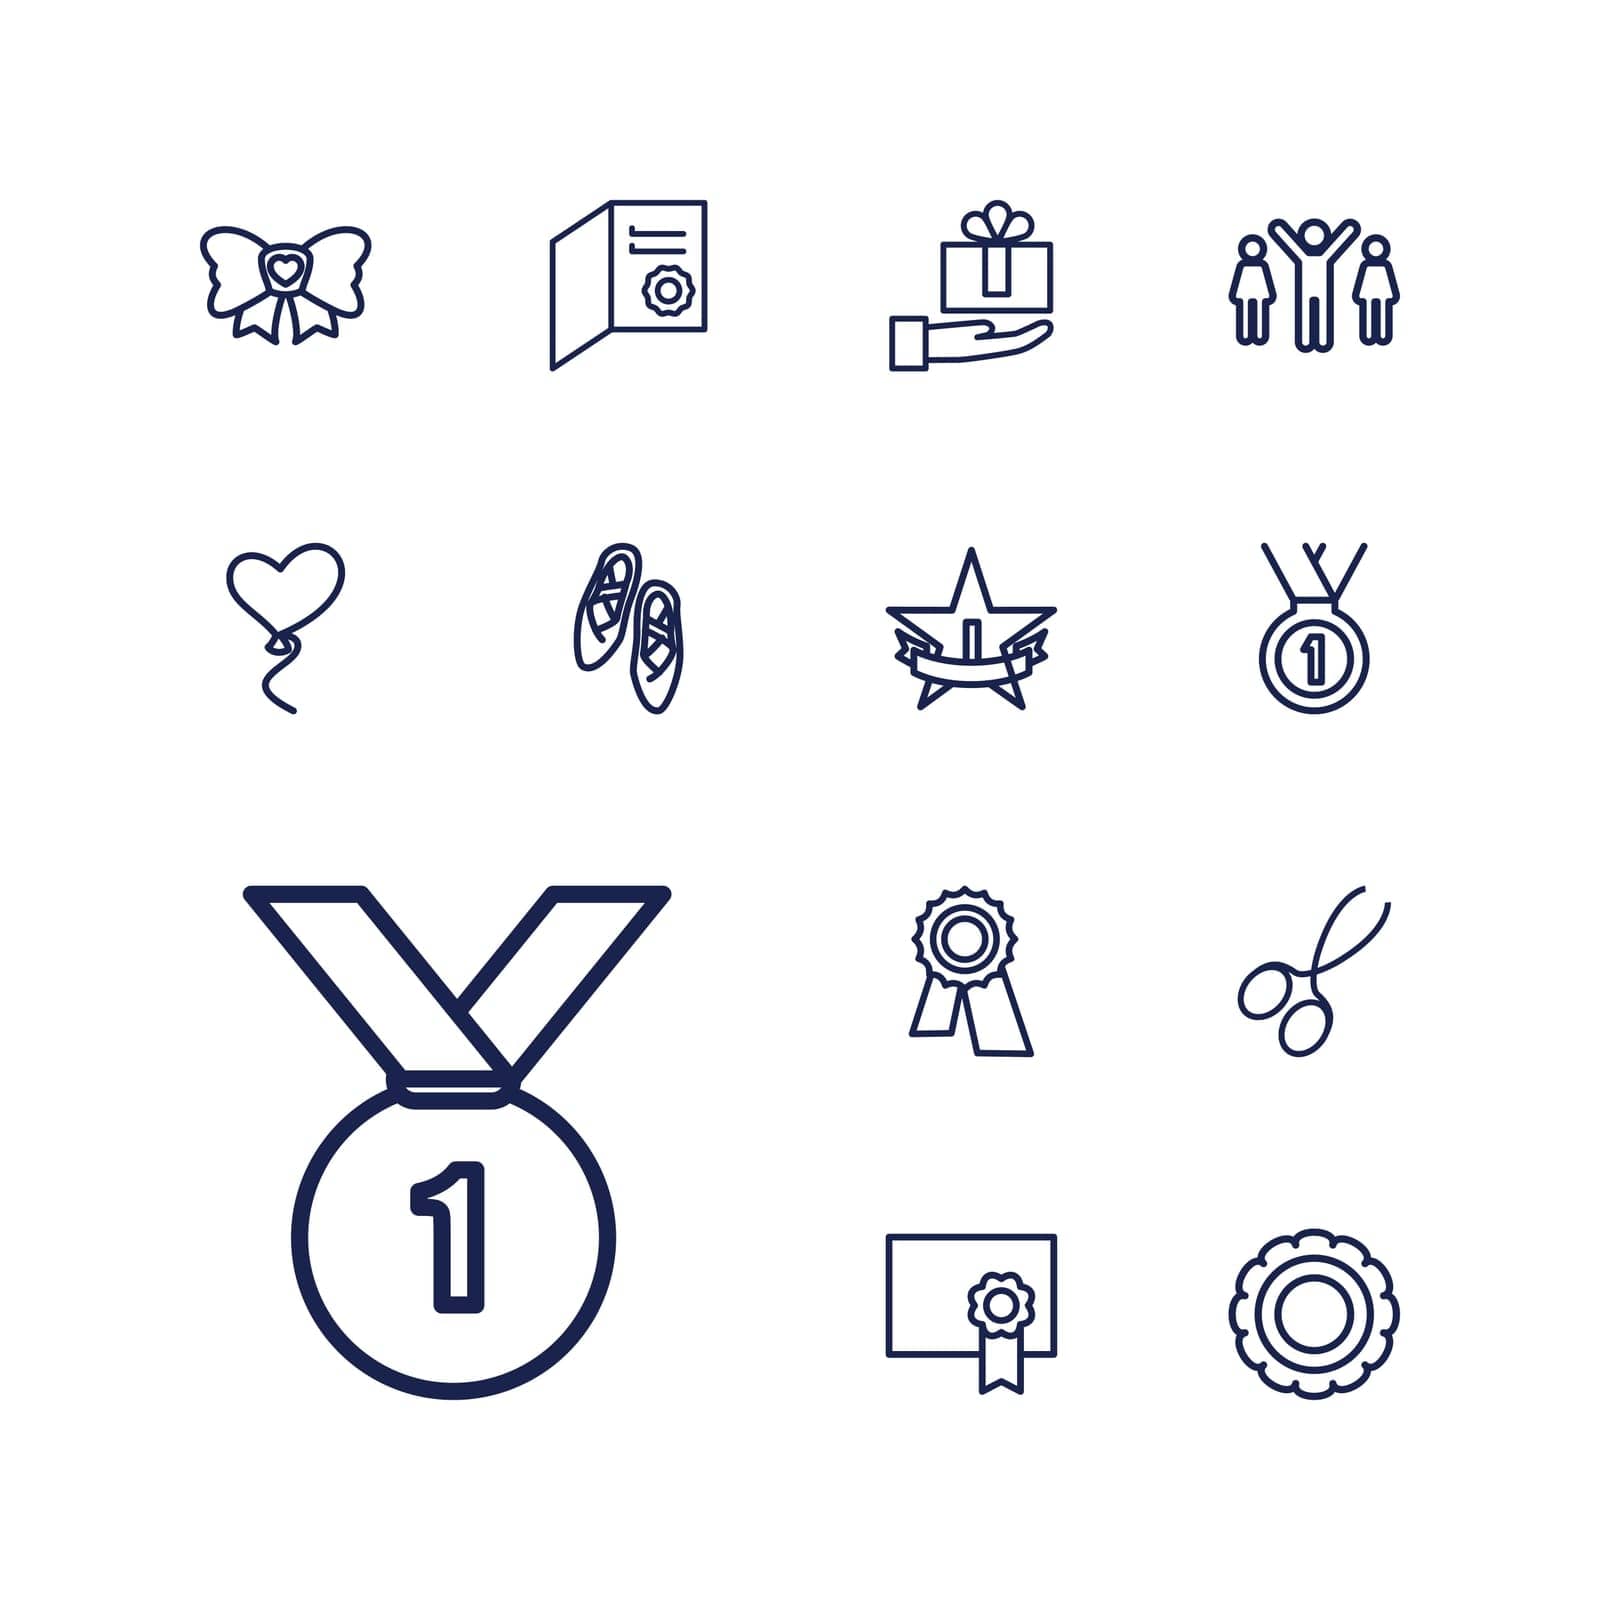 gift,symbol,achievement,balloons,icon,sign,isolated,competition,best,bow,number,award,white,design,medal,vector,place,diploma,celebrating,decoration,graphic,hand,element,on,st,set,star,victory,ribbon,ballet,shoes,heart,scissors,badge,celebration,winner,background,success,illustration,manicure,first